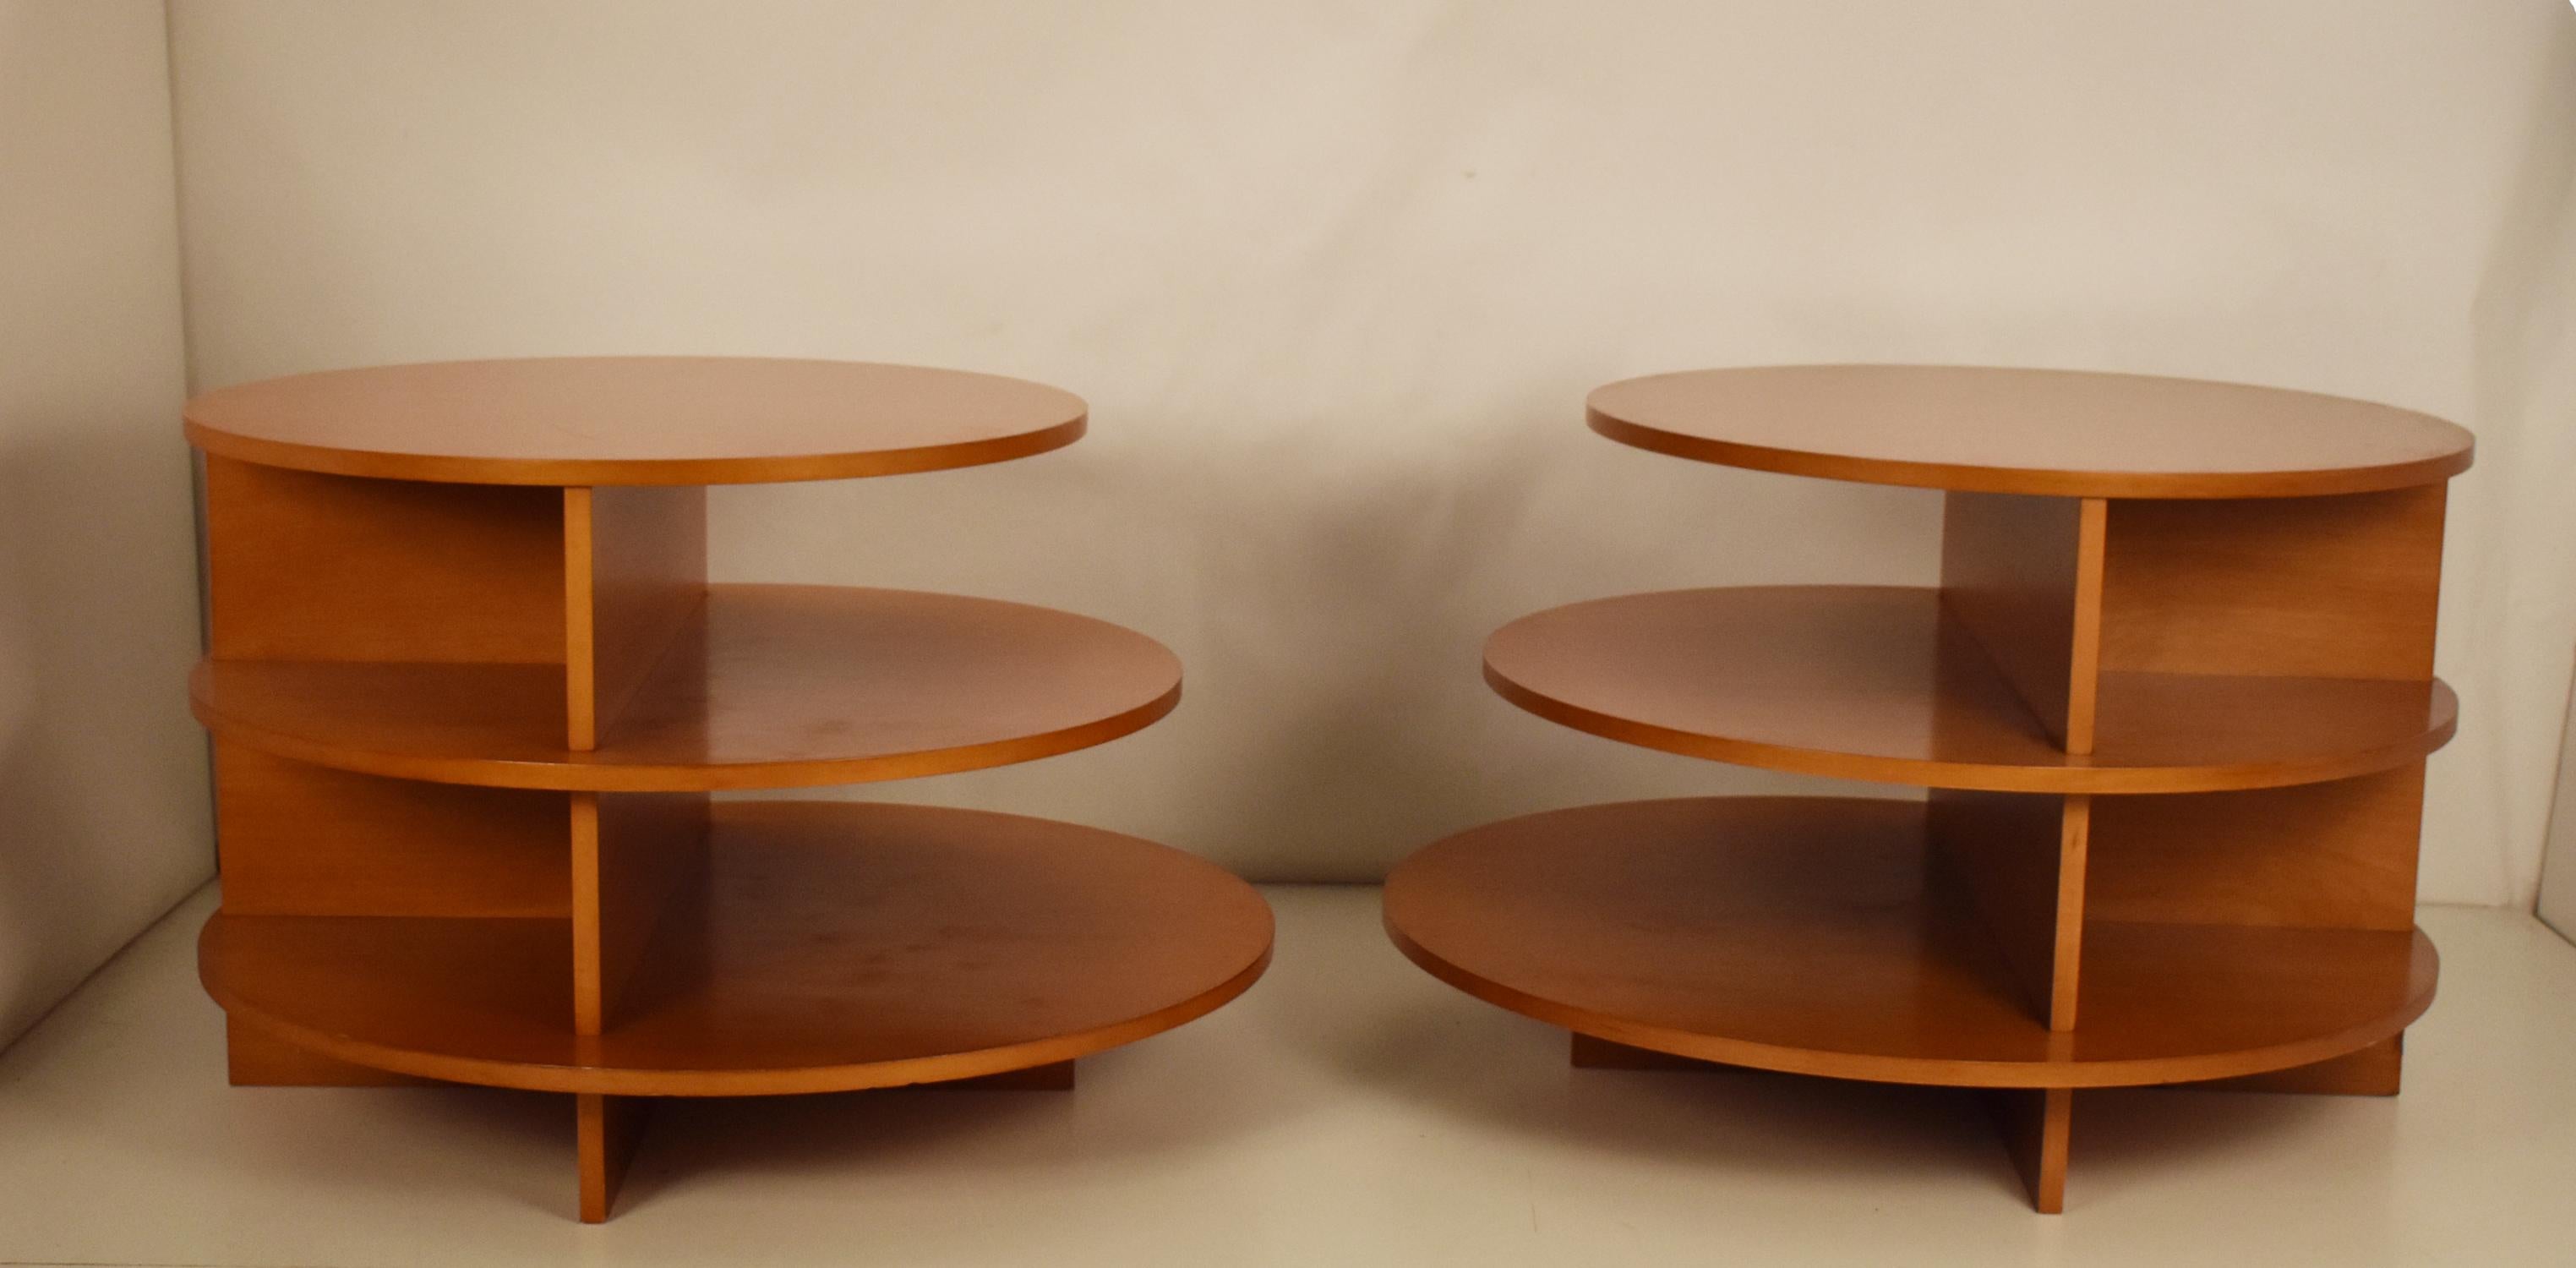 Late 20th Century Pair of Mid-Century Modern Novocomun Coffee Tables by Giuseppe Terragni for BD